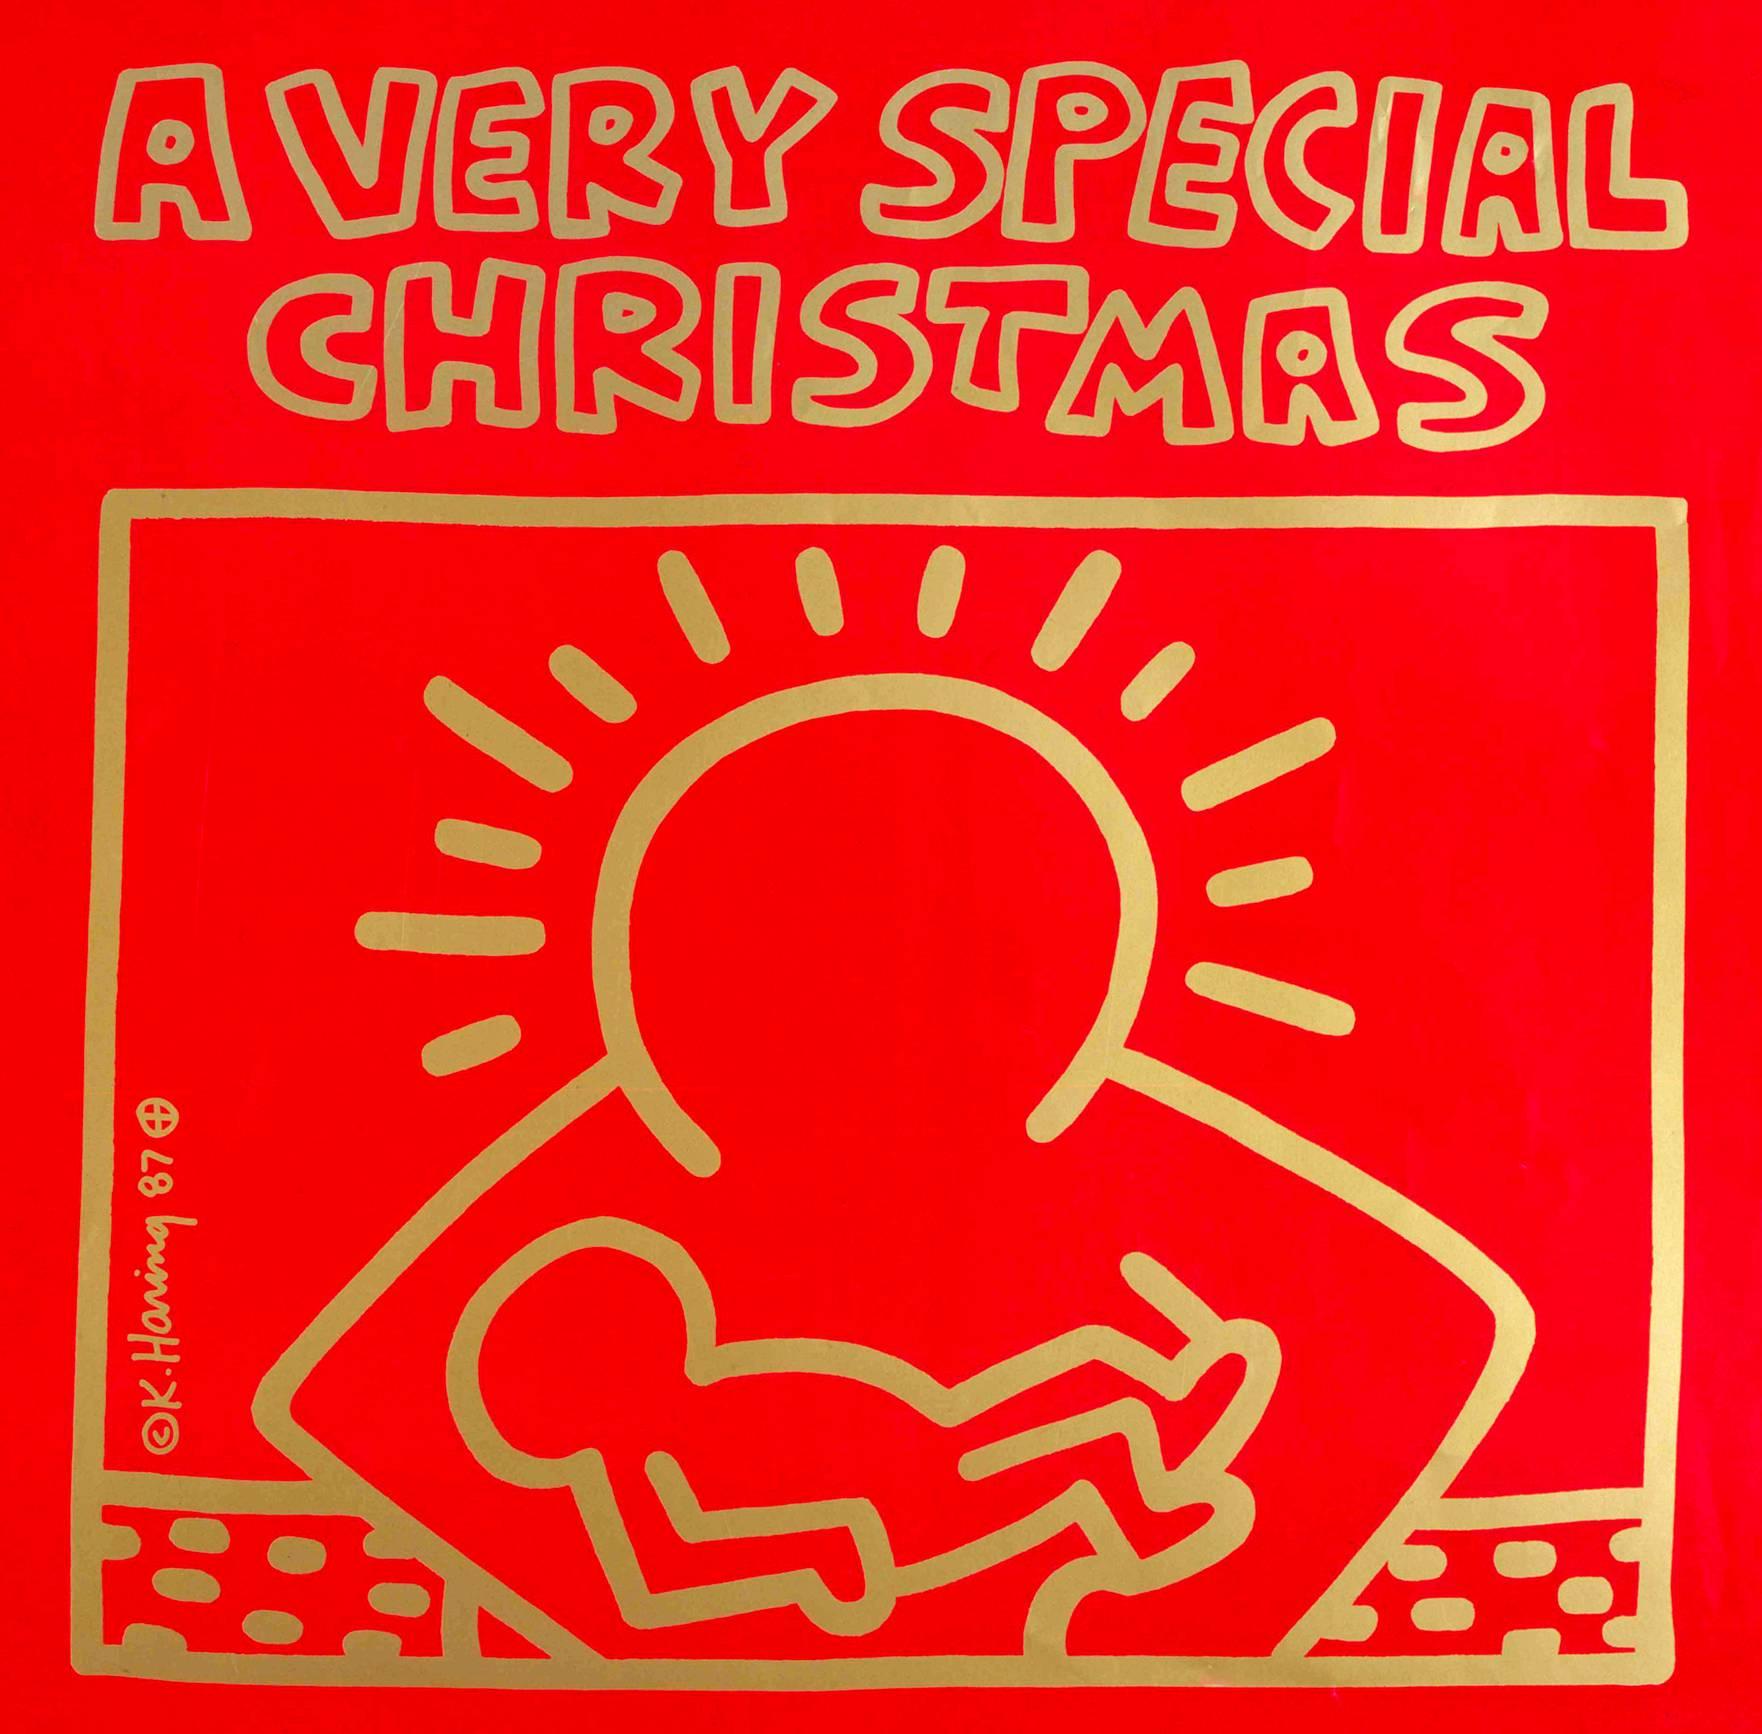 Original 1987 Vinyl Record Art by Keith Haring

Off-Set Lithograph on vinyl record jacket; engraved gold foil
12 x 12 inches 
Plate signed by Haring
Truly vibrant colors that make for stand-out wall art 
Minor signs of handling; otherwise in very